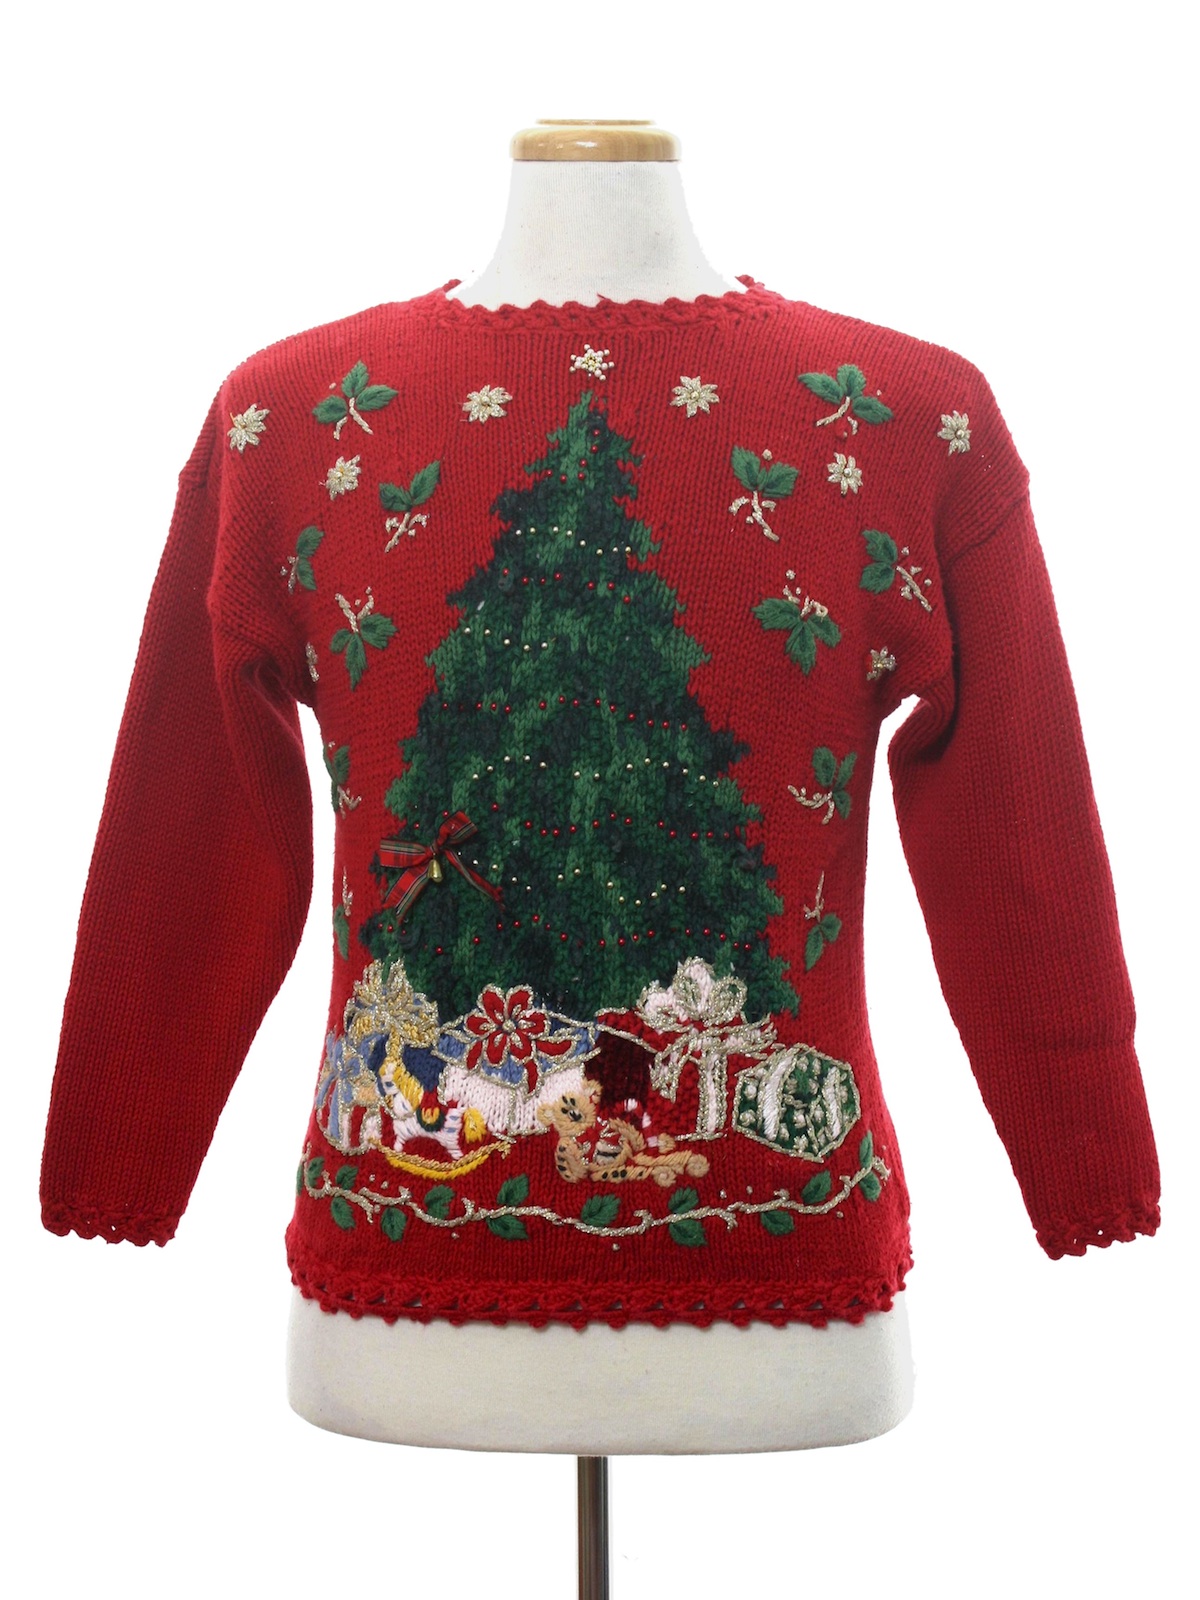 Womens Ugly Christmas Sweater: -Heirloom Collectibles- Womens red ...